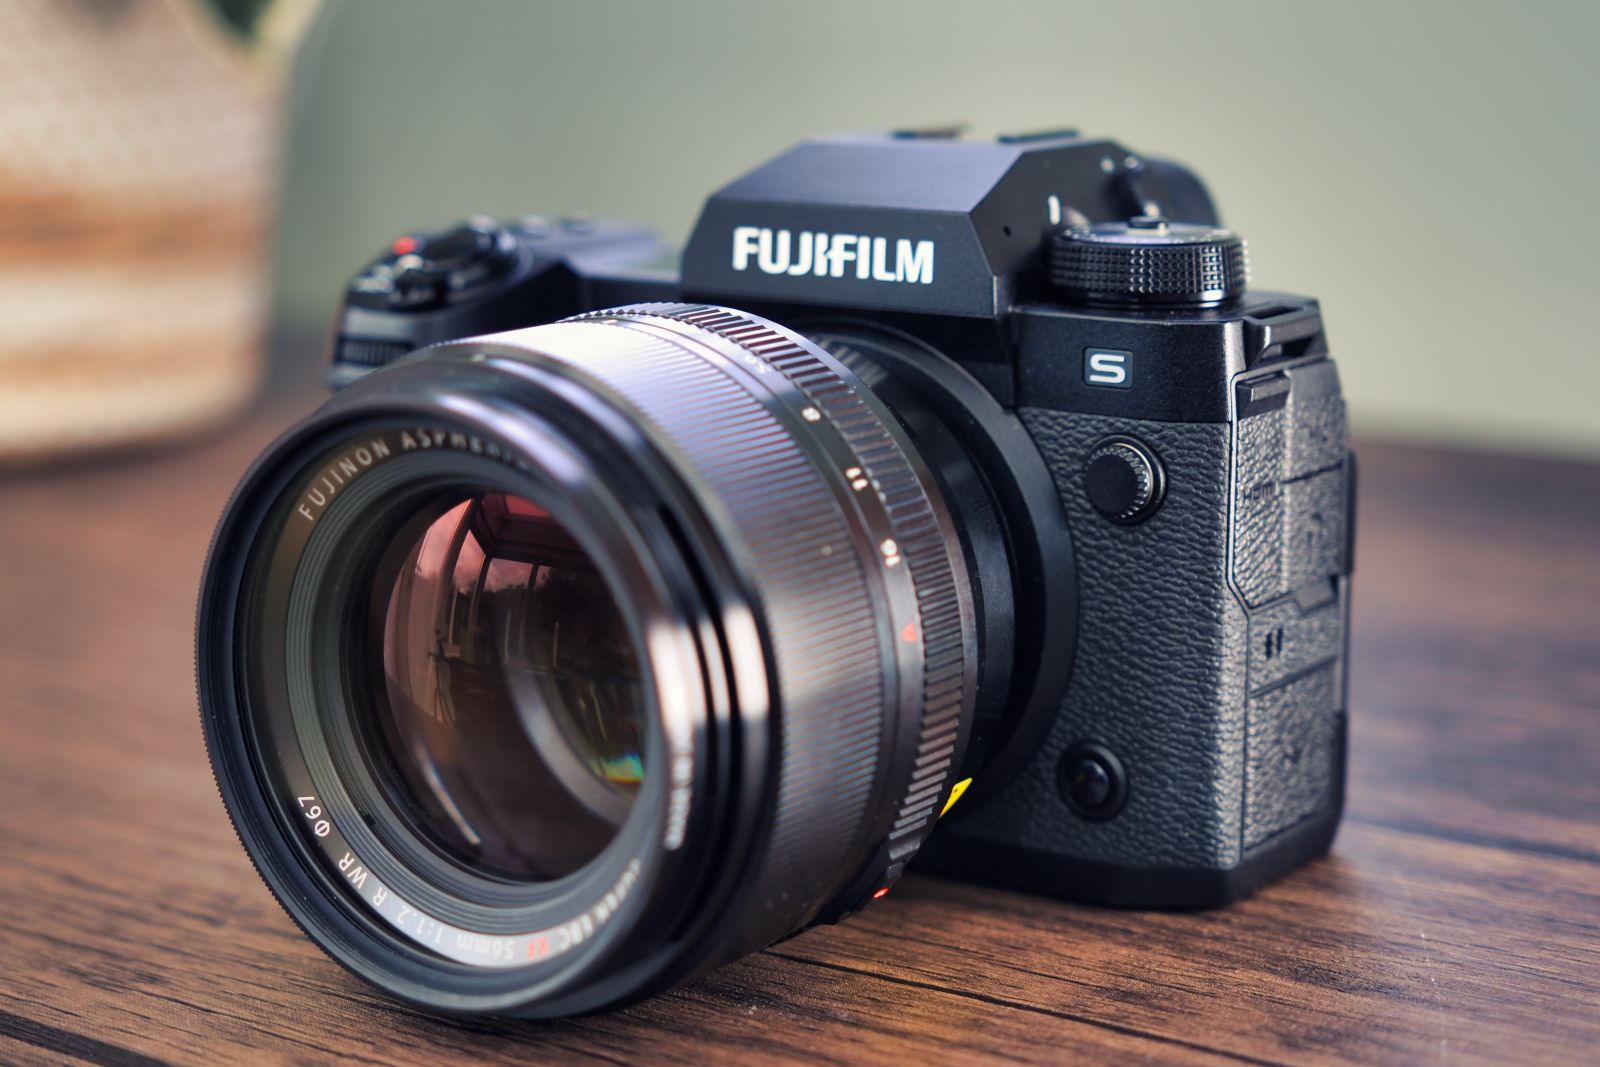 Fujifilm X-H2S review: The most powerful APS-C camera yet